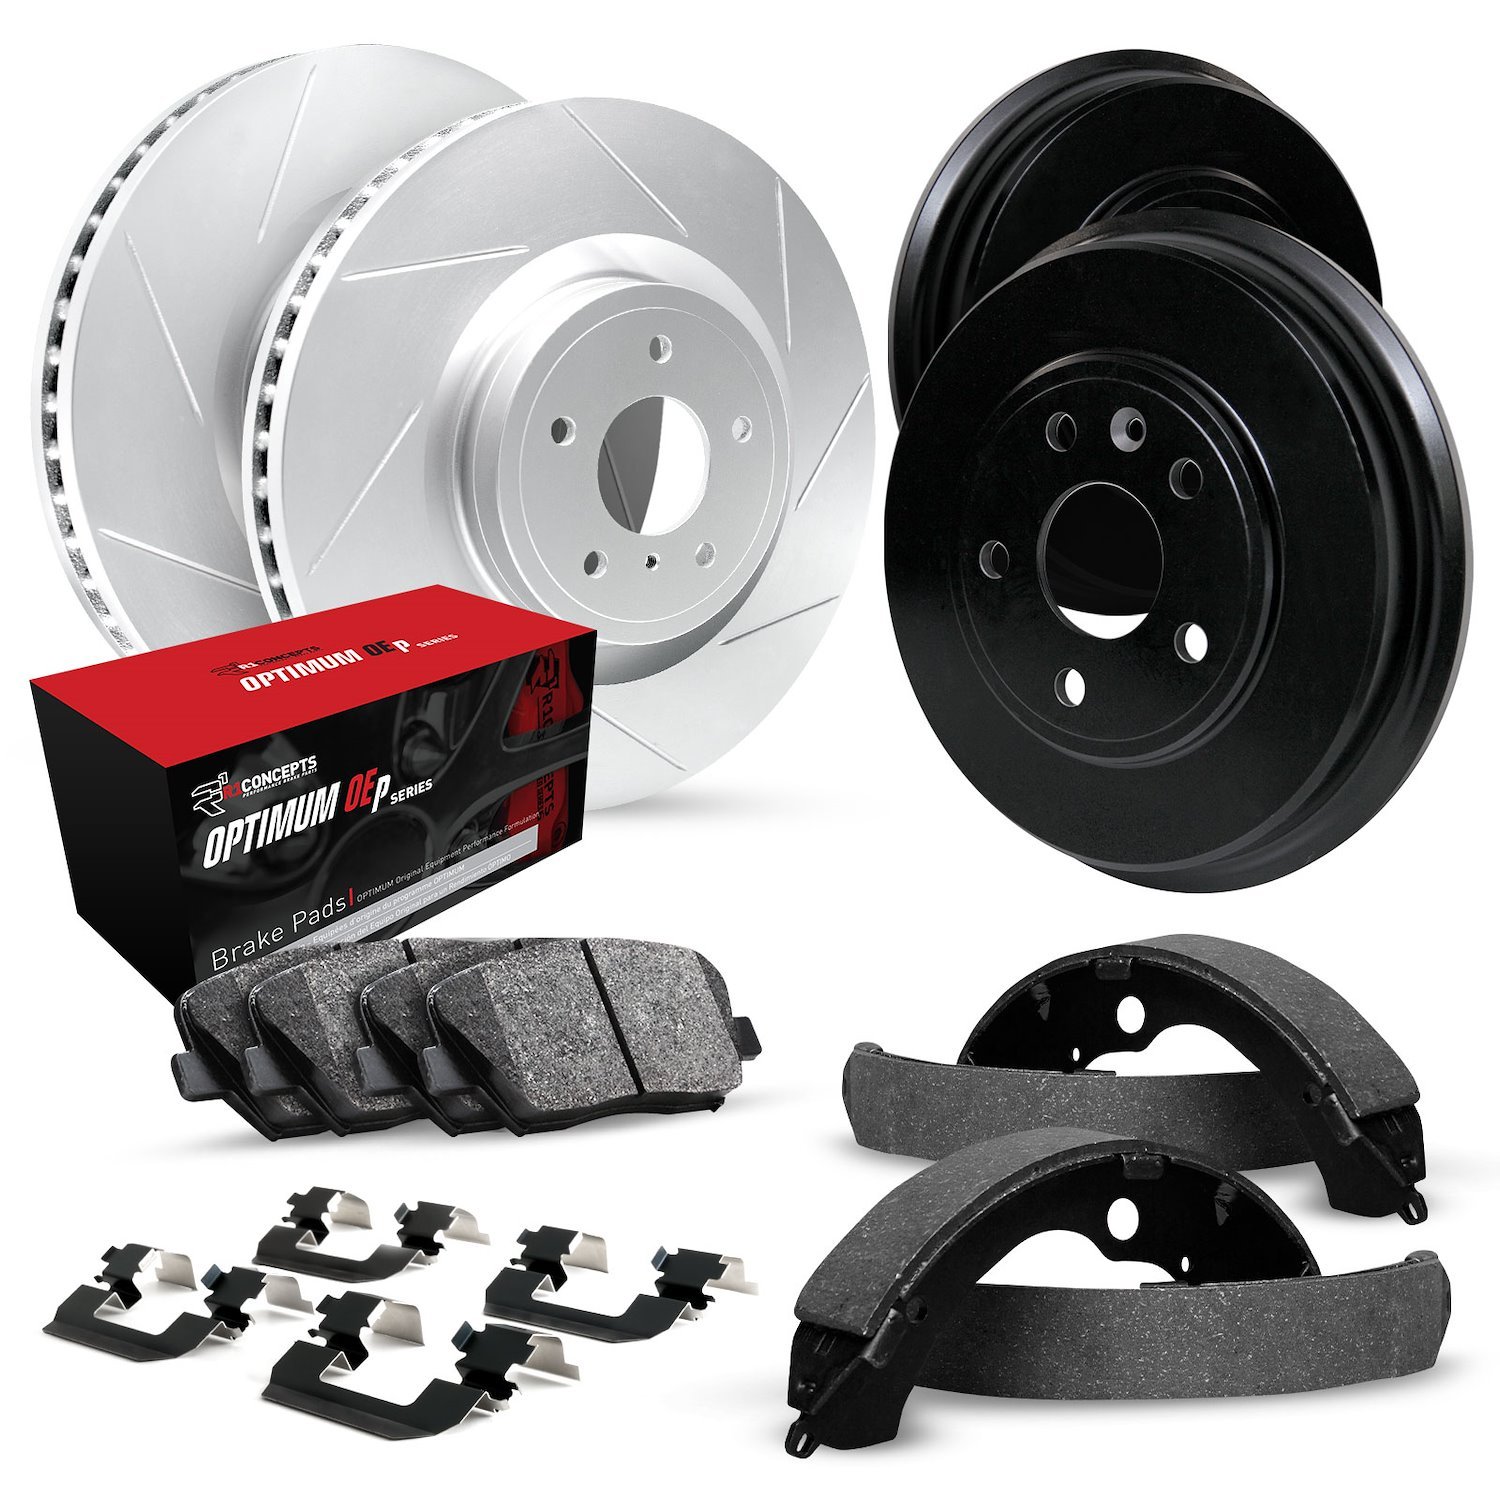 GEO-Carbon Slotted Brake Rotor & Drum Set w/Optimum OE Pads, Shoes, & Hardware, 1976-1989 GM, Position: Front & Rear